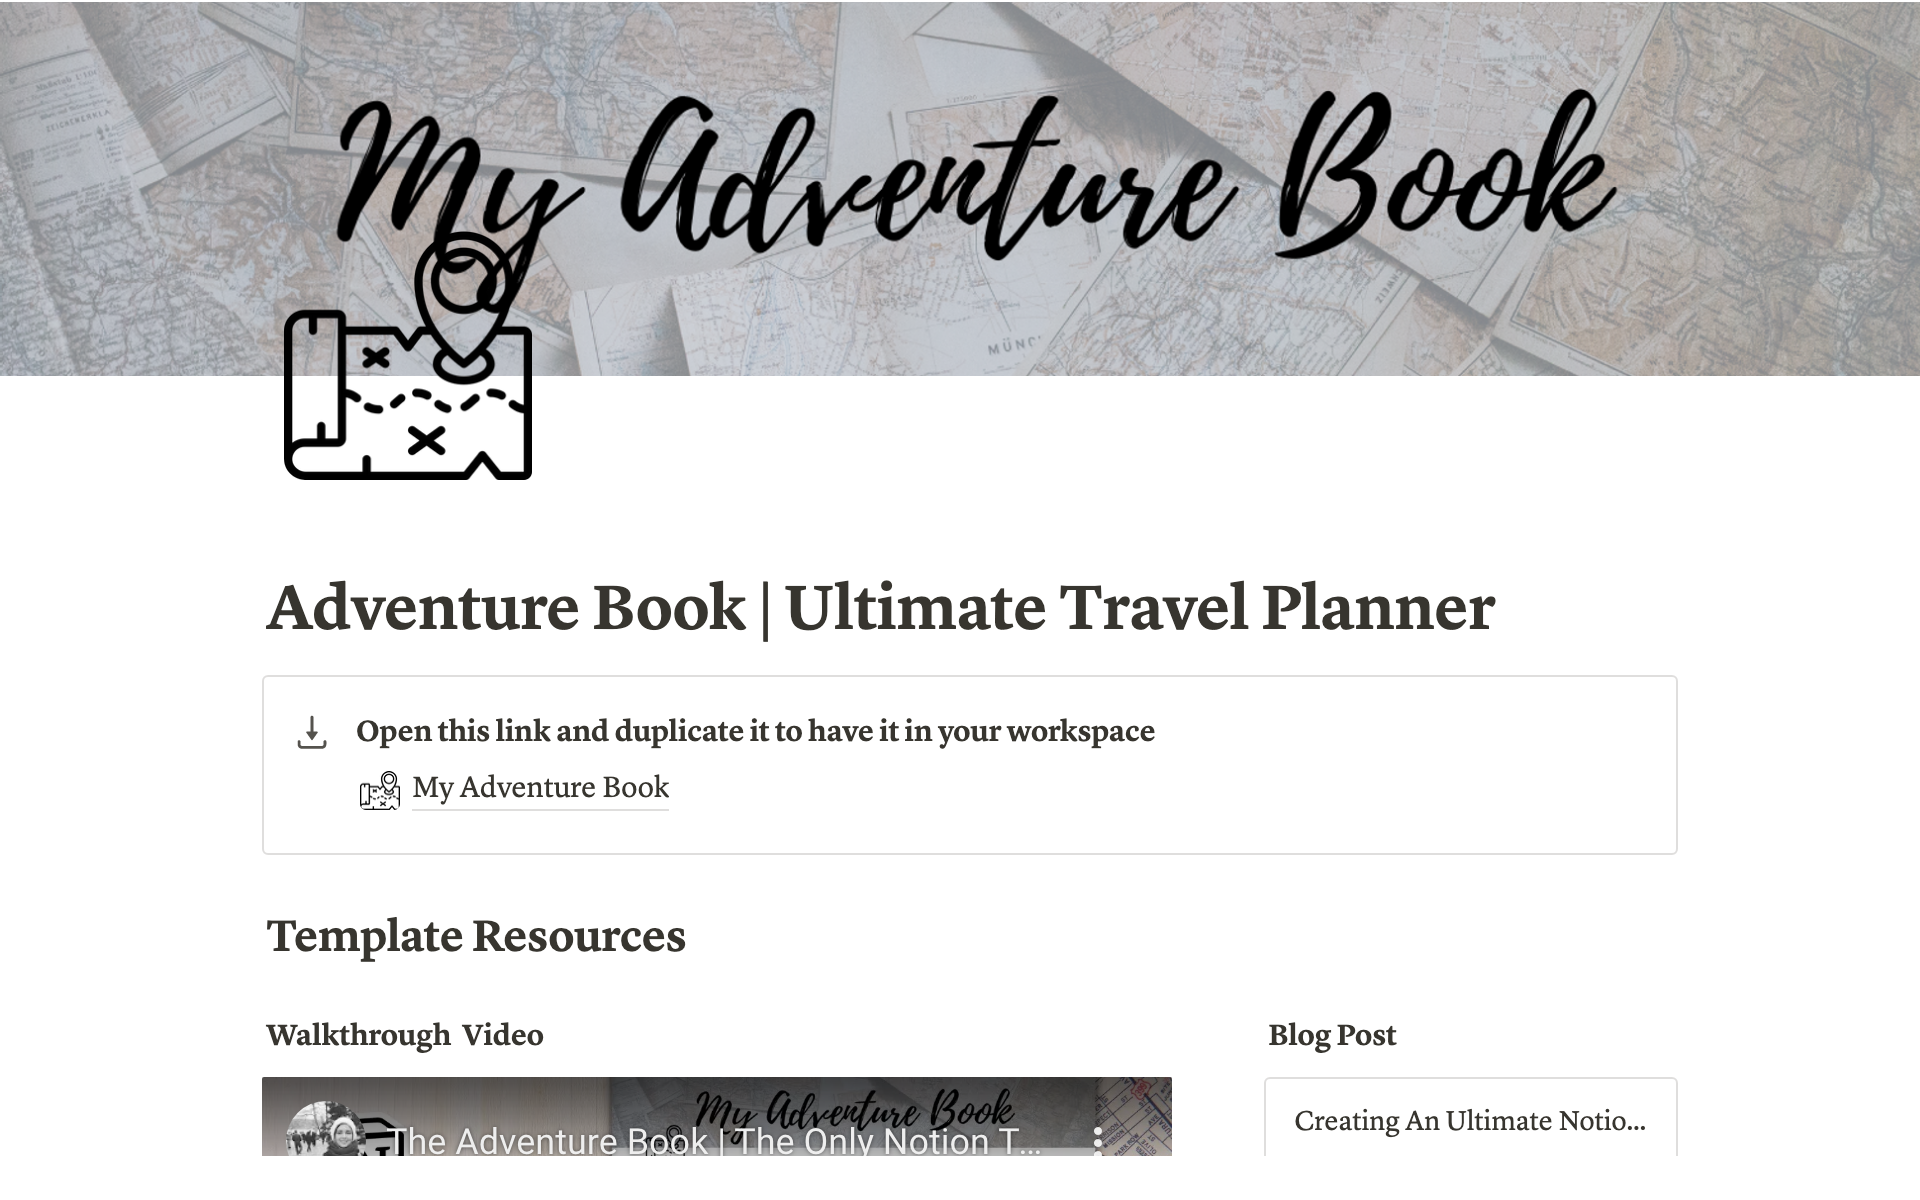 An all-in-one Travel planner